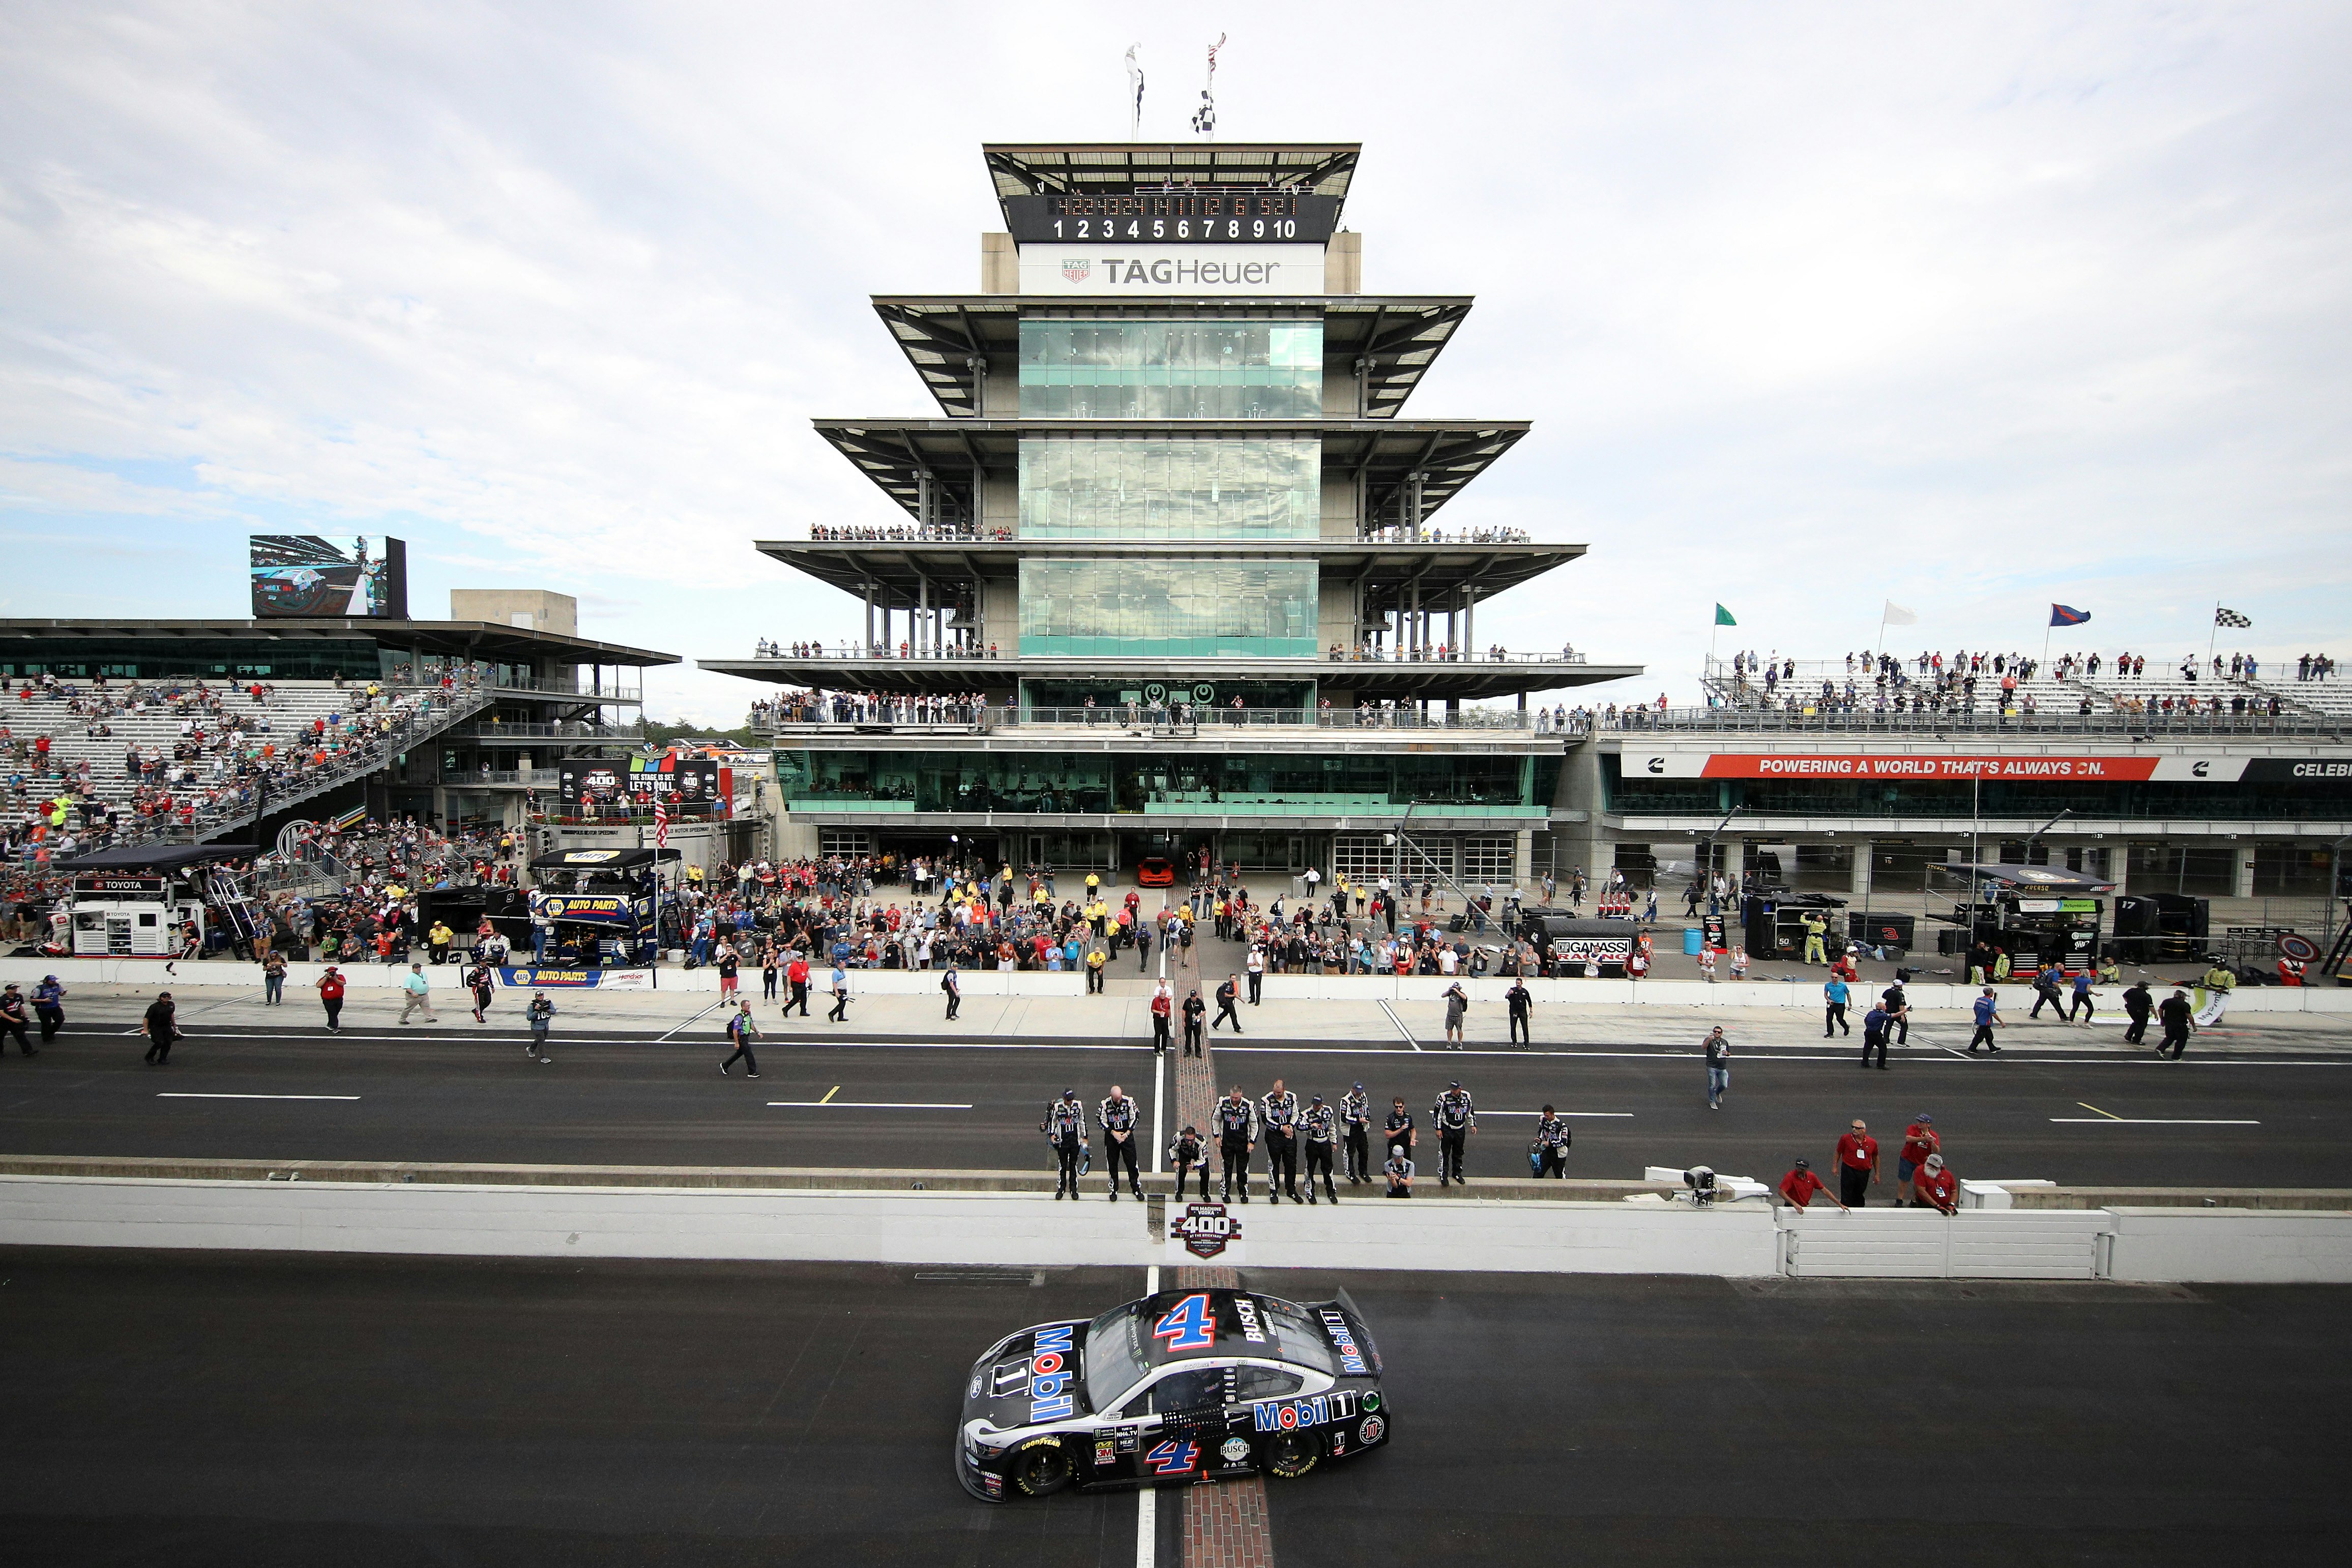 A race car drives over the iconic brick lane at the Indianapolis Motor Speedway. In the background, a large crowd is sitting in the stands.